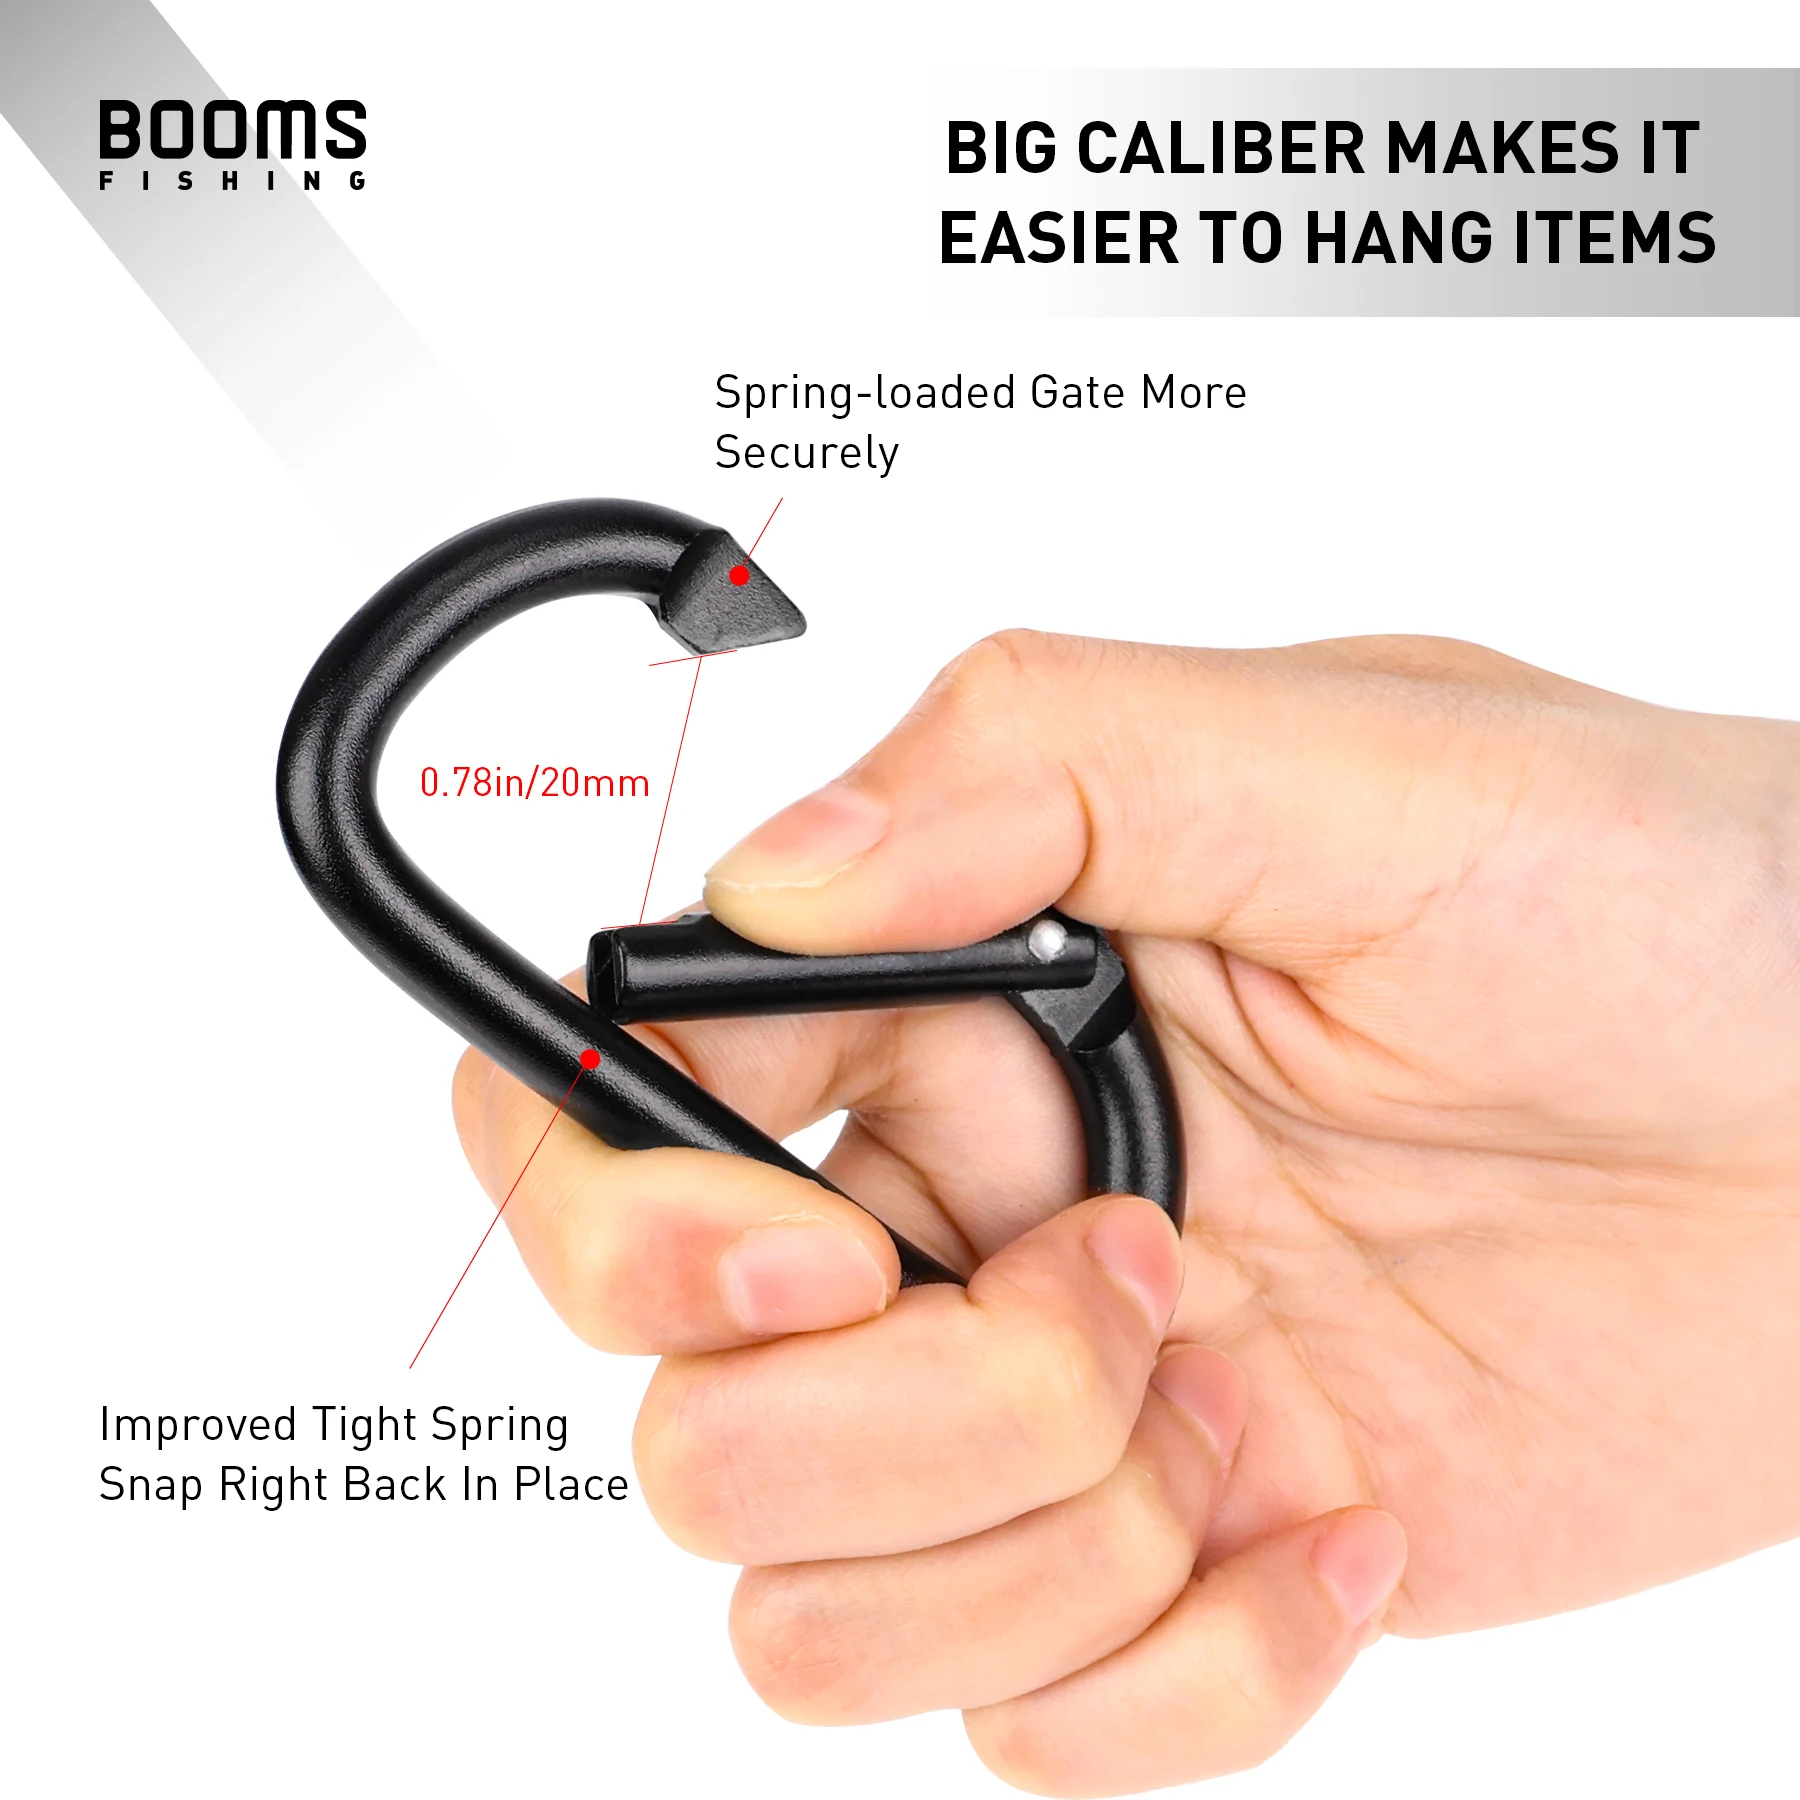 Booms Fishing HB1 Carabiner Baby Stroller Hook PU Leather Adjustable Pram  Cart Hooks Buckle Outdoor Camping Travel Accessories - AliExpress